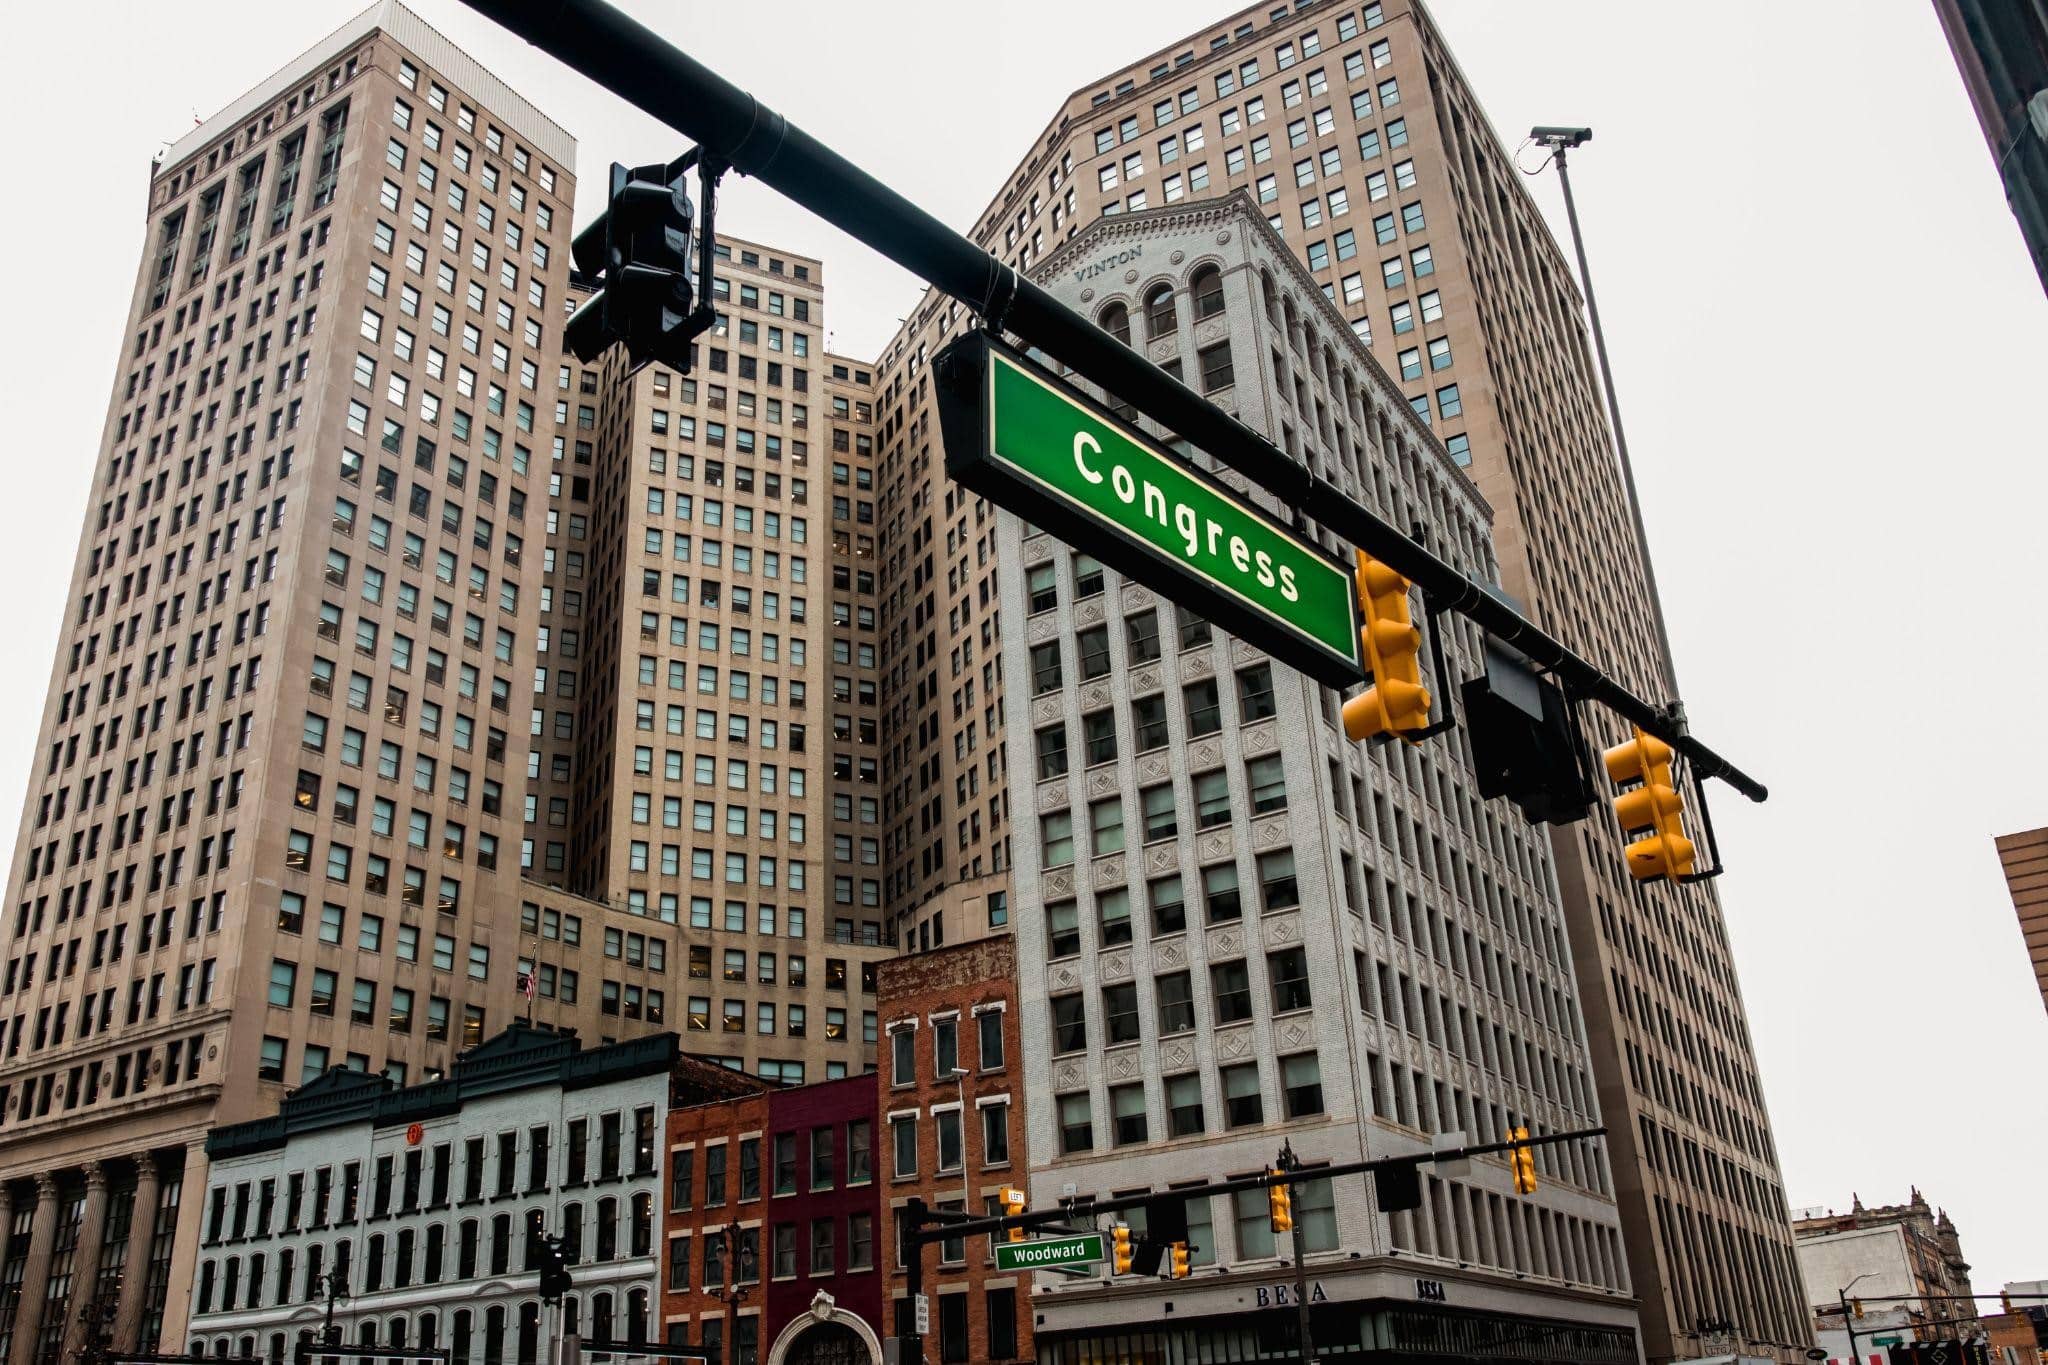 A street shot of buildings at an intersection in the City of Detroit